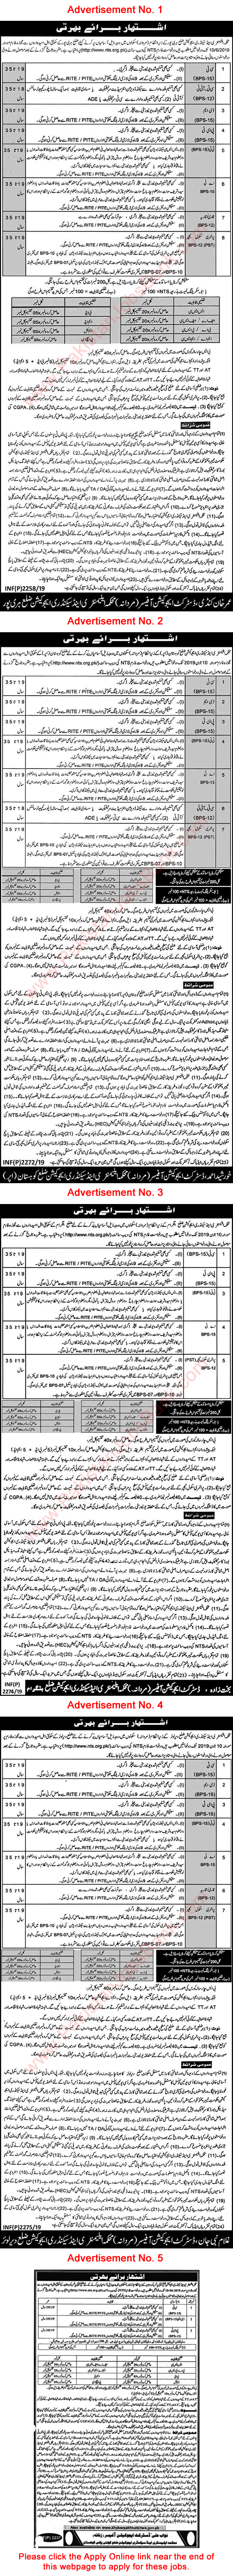 Teaching Jobs in Elementary and Secondary Education Department KPK 2019 May NTS Application Form Download ESED Latest